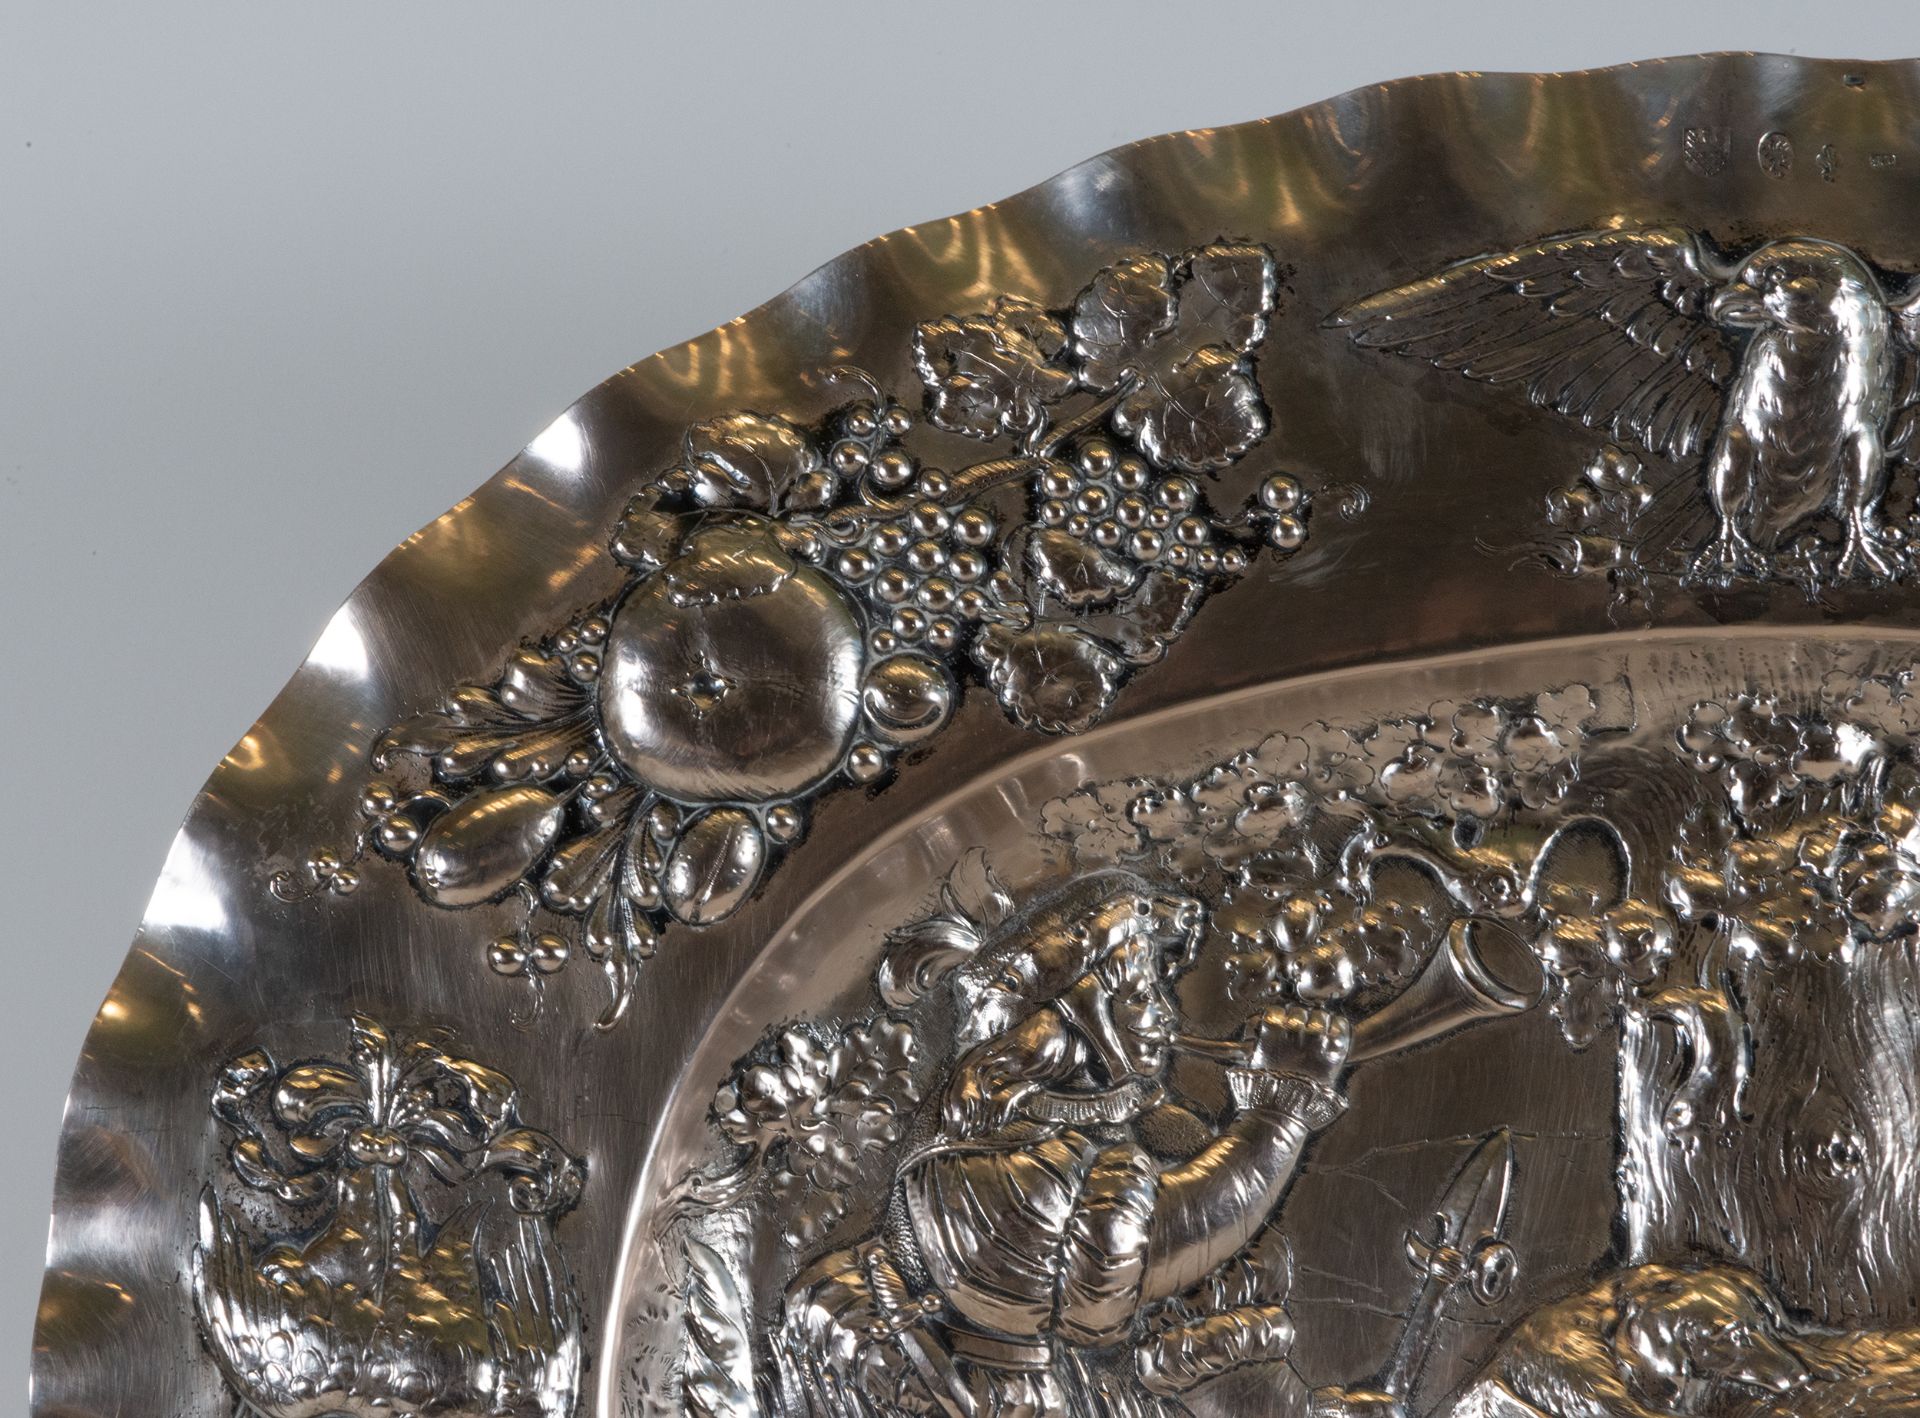 Large Pair of Sterling Silver Trays with Chivalry Motifs, Marks of England, 19th Century - Image 9 of 12